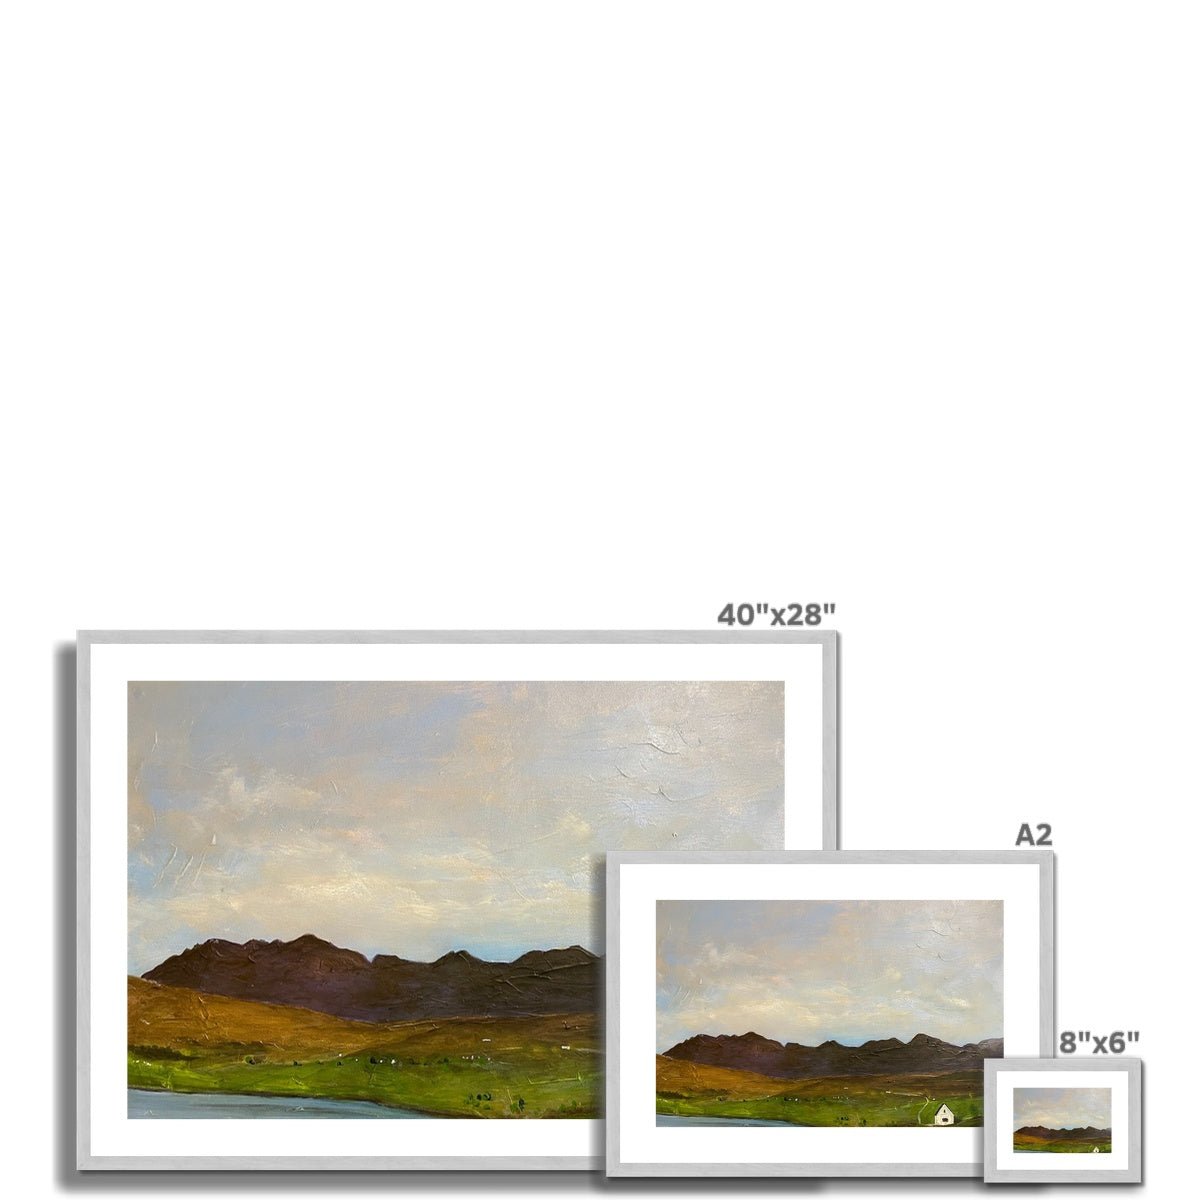 The Road To Carbost Skye Painting | Antique Framed & Mounted Prints From Scotland-Antique Framed & Mounted Prints-Skye Art Gallery-Paintings, Prints, Homeware, Art Gifts From Scotland By Scottish Artist Kevin Hunter